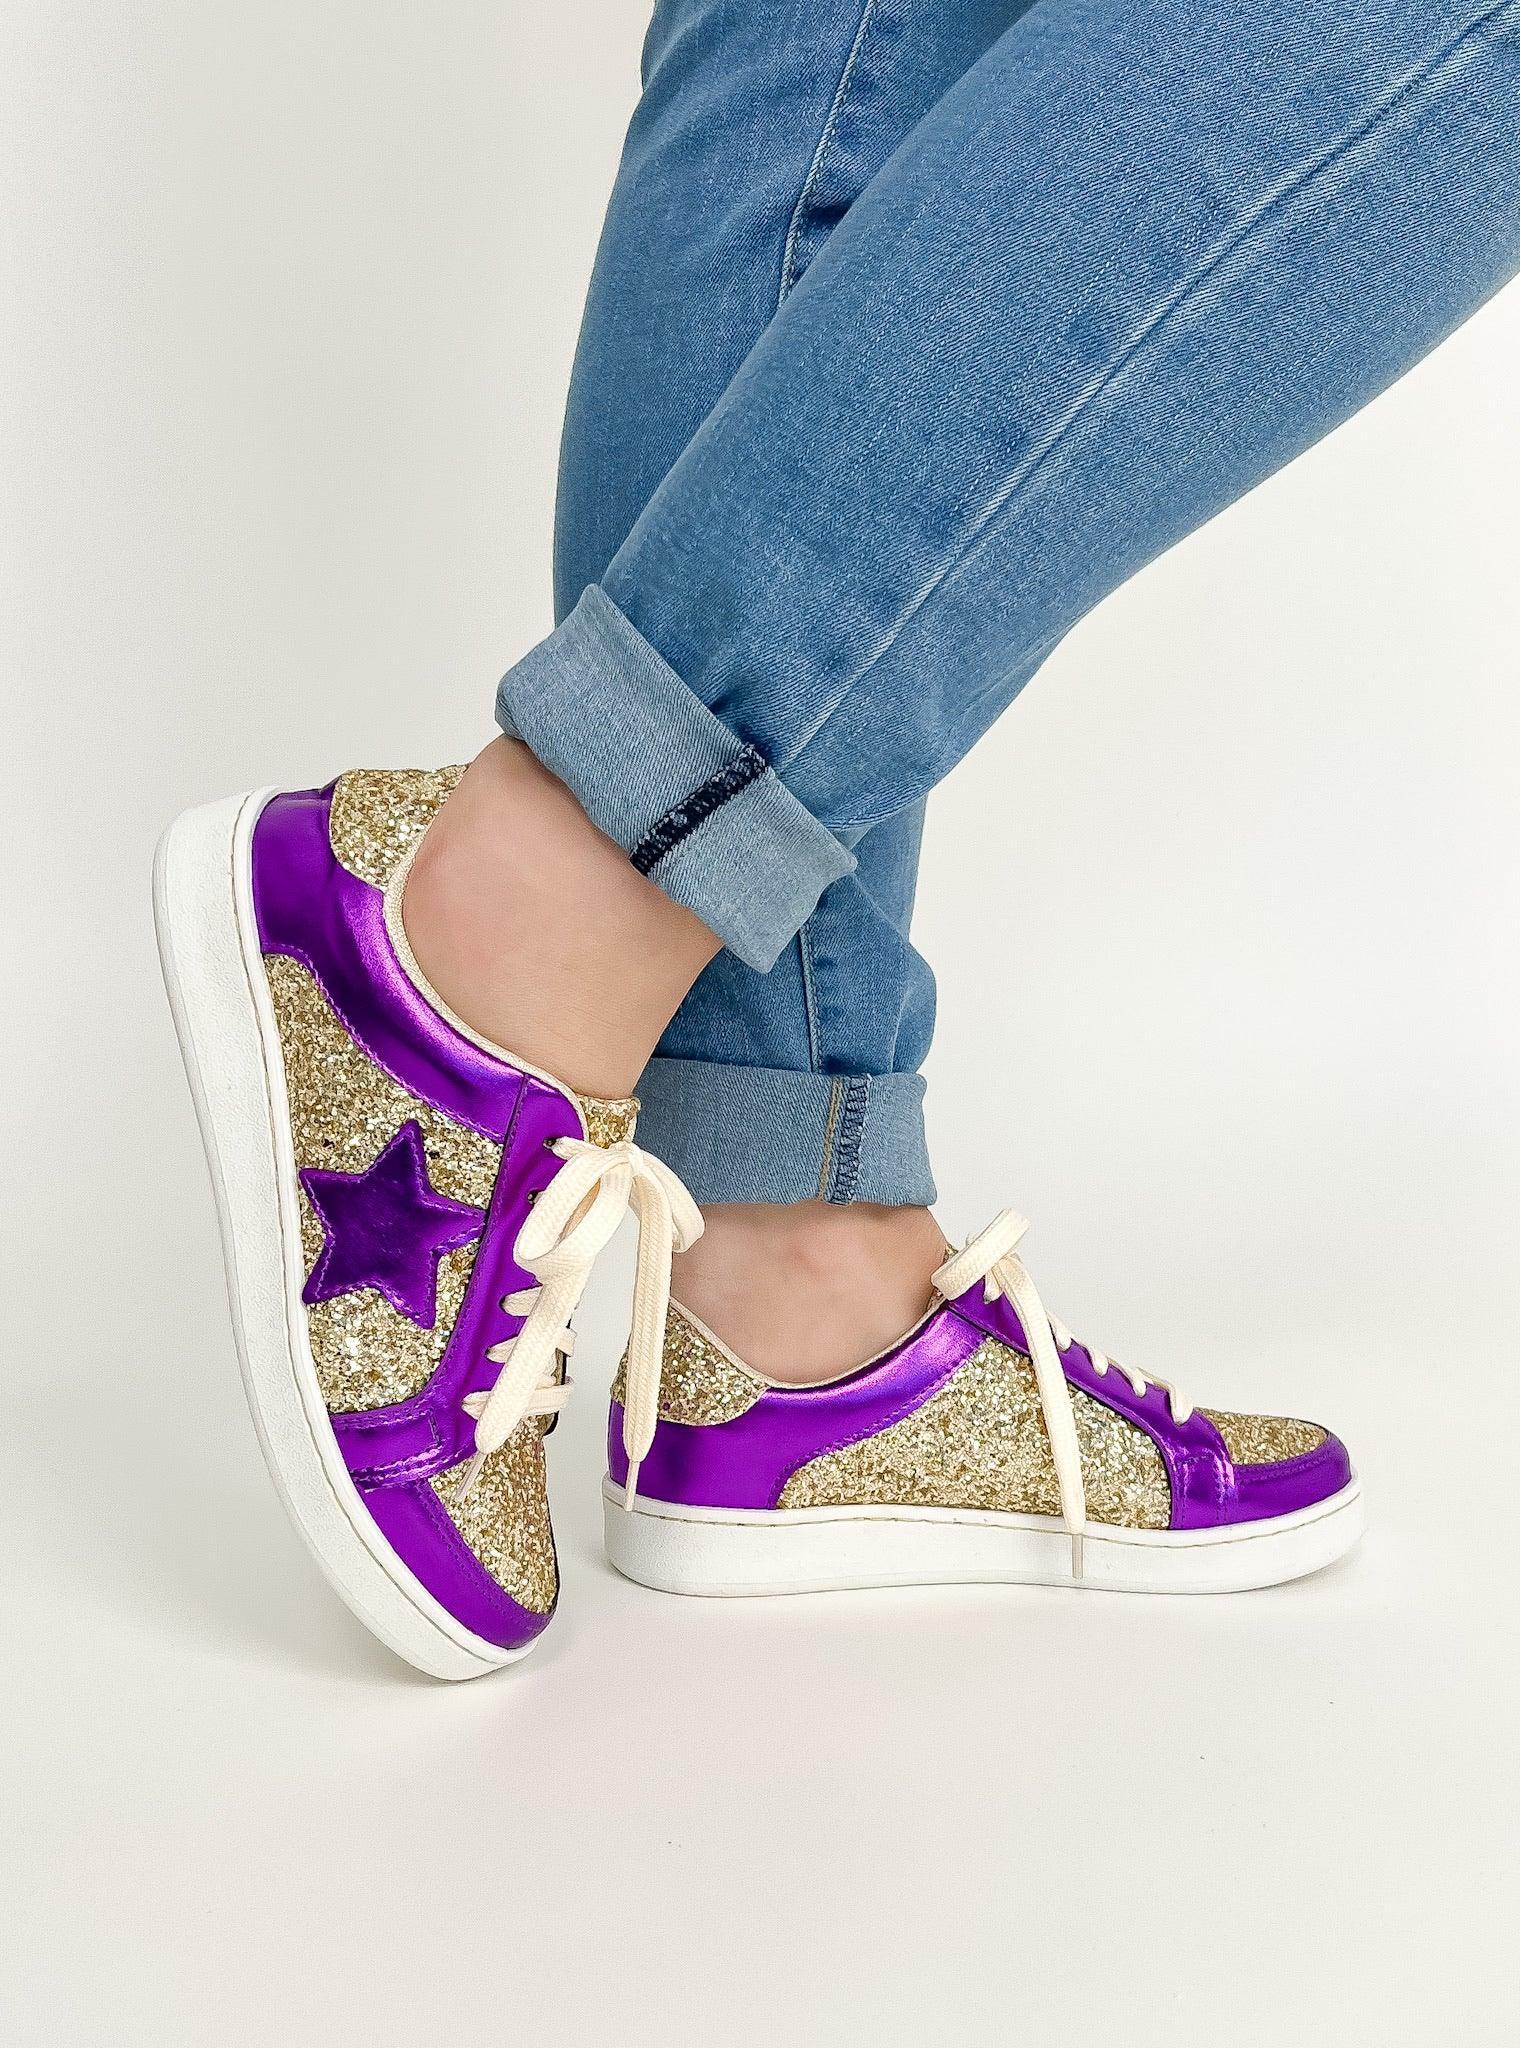 Play Ball Glitter Sneakers by VH Purple Gold / 11